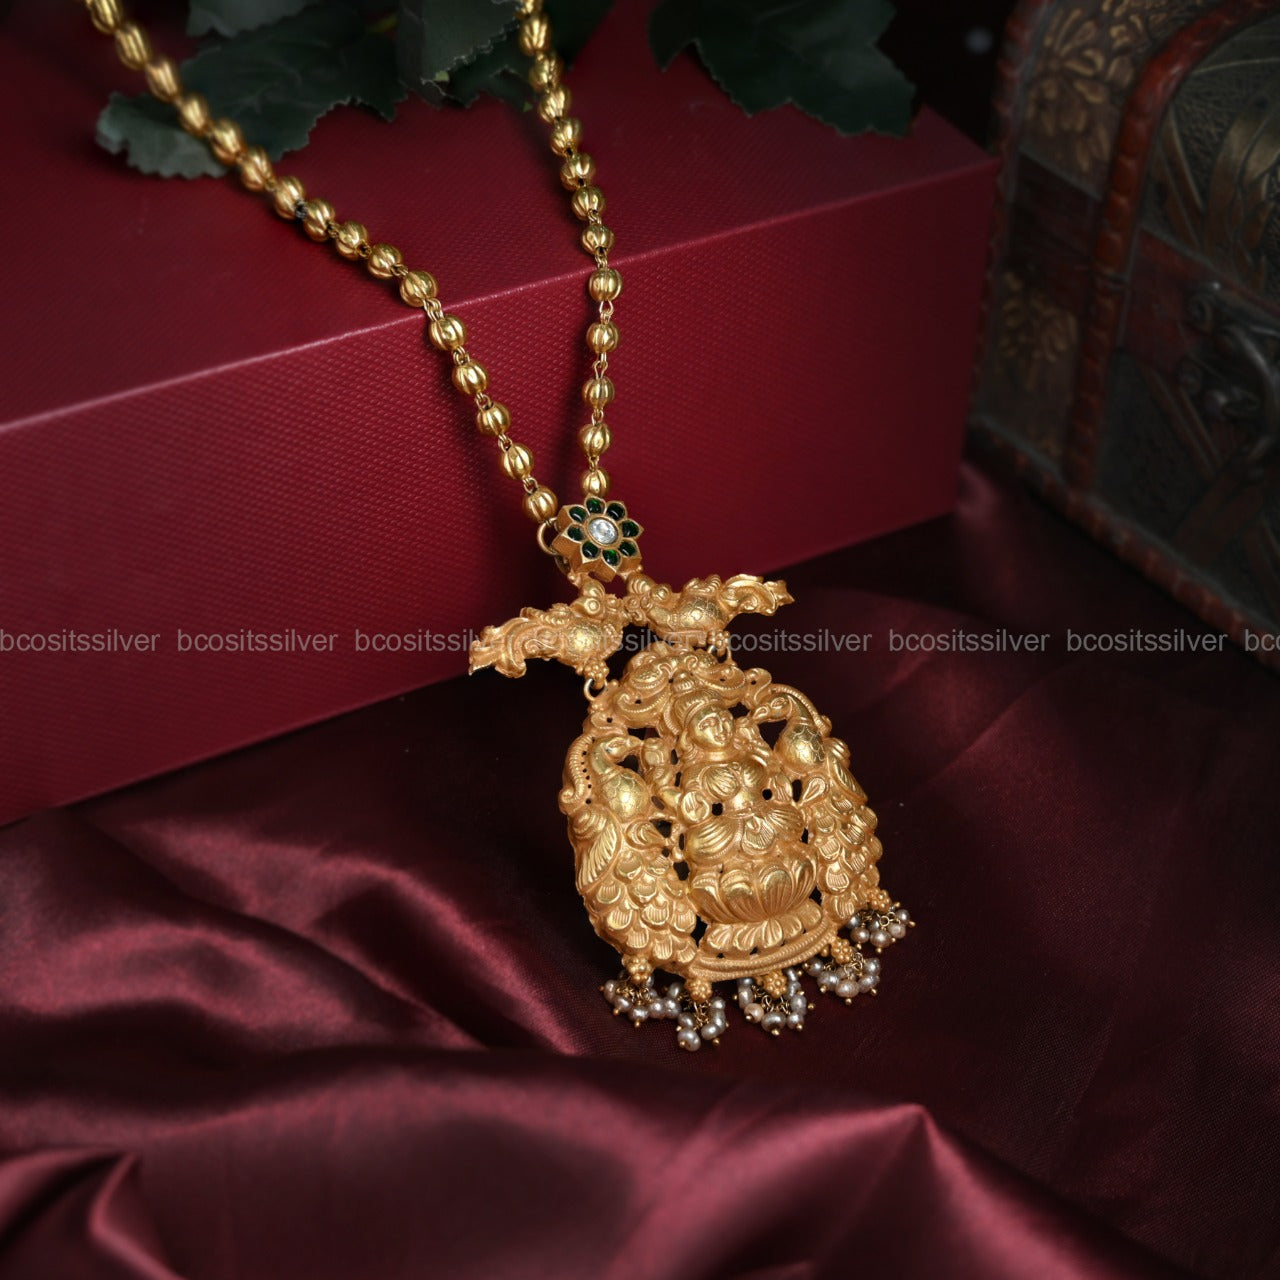 Gold Plated Chain with Lakshmi Pendant - 7027